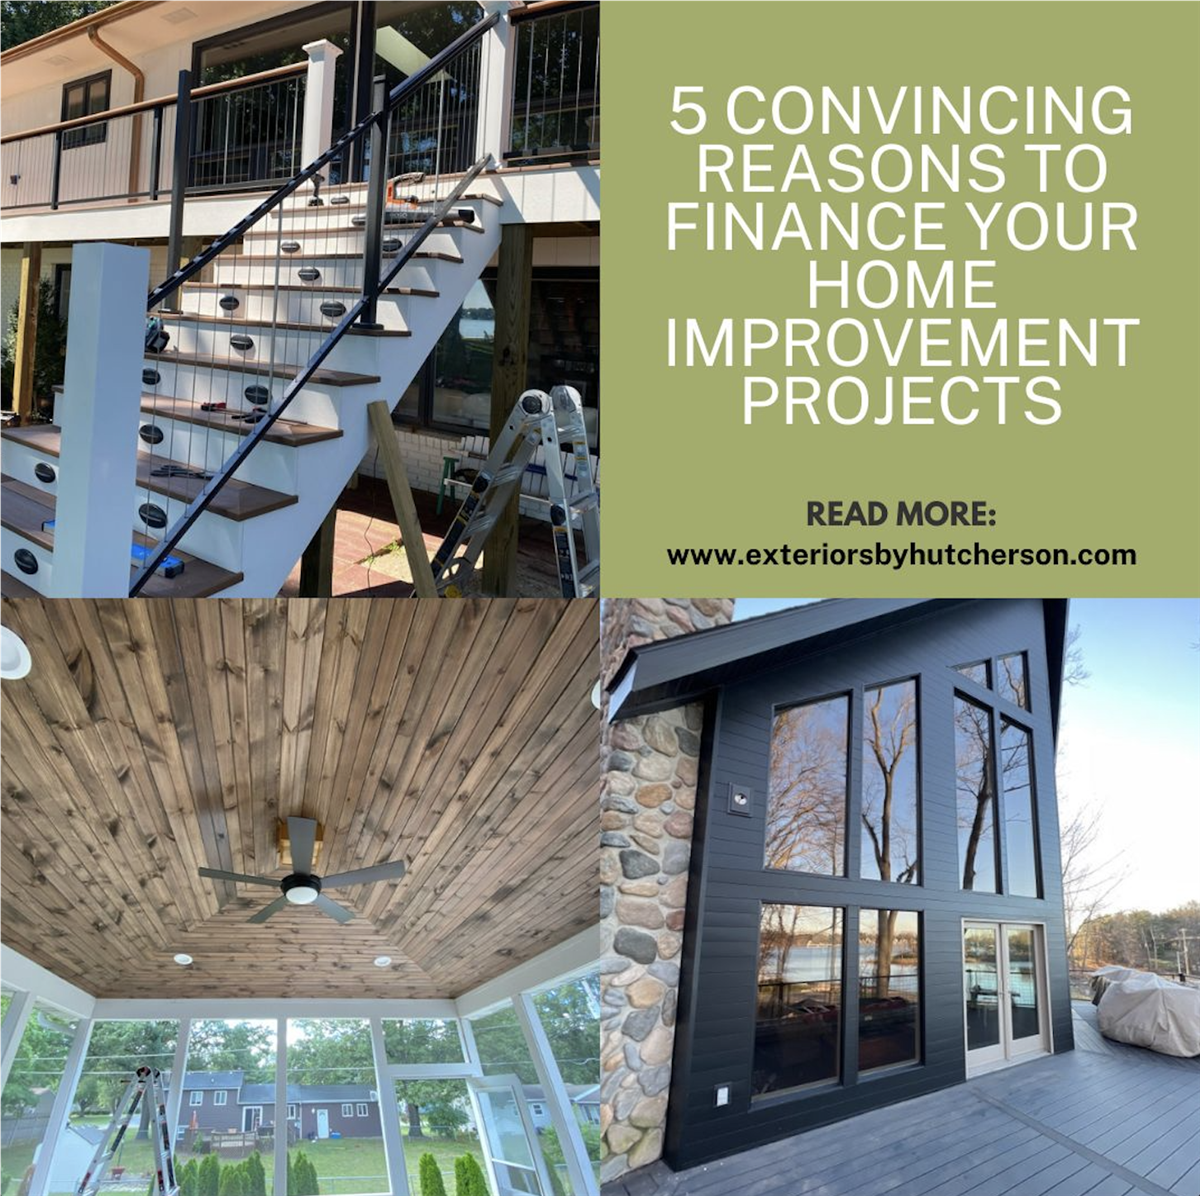 5 Convincing Reasons to Finance Your Home Improvement Projects